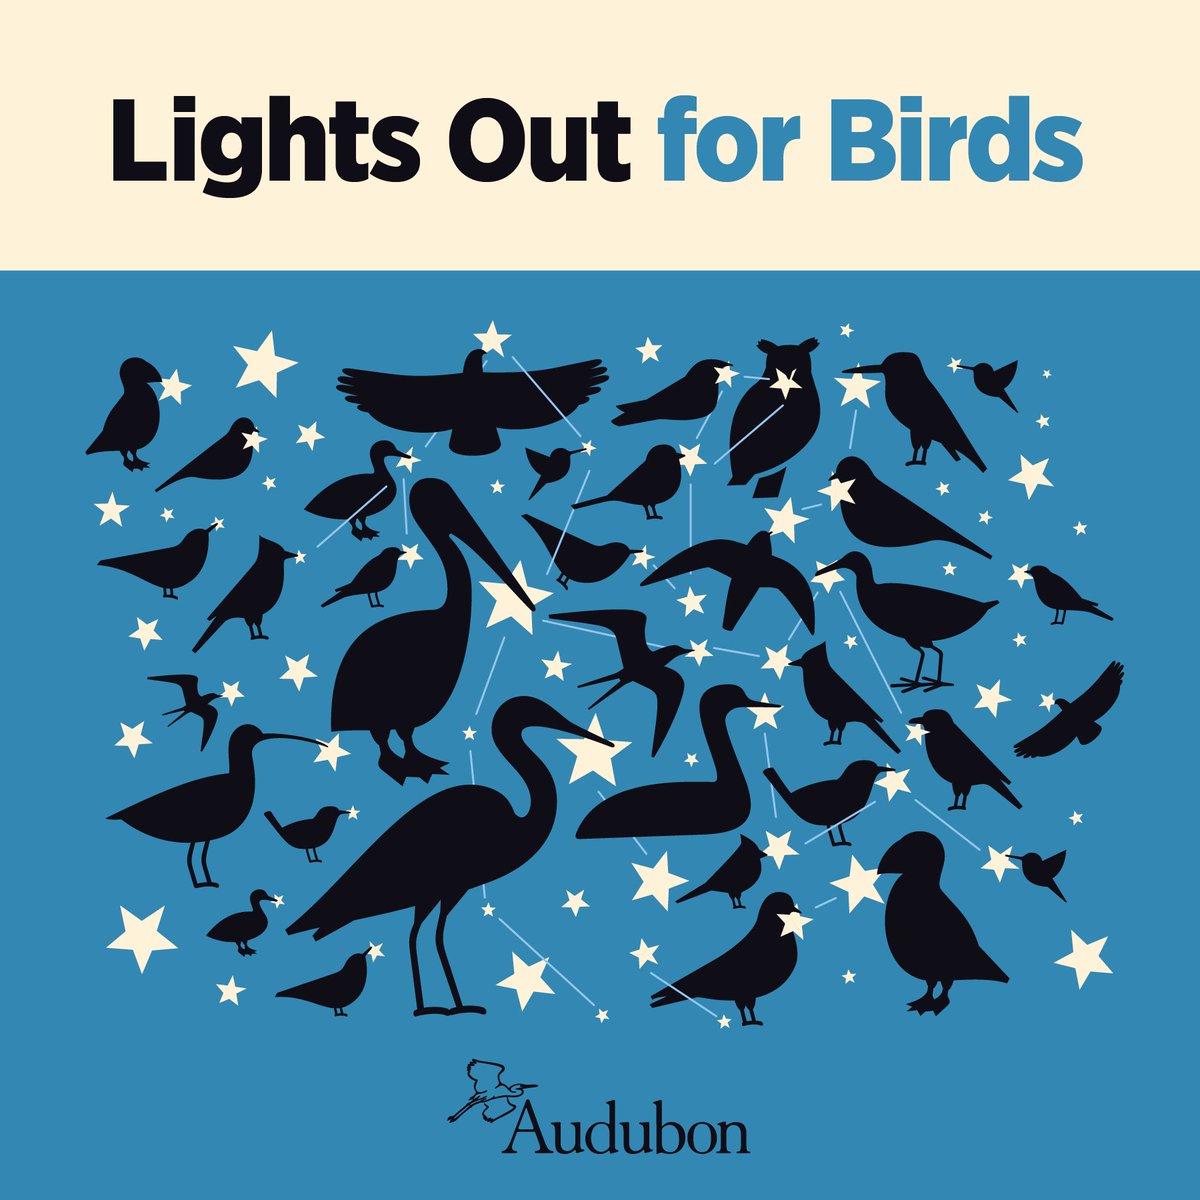 Pledge to stand with us as we call on building owners, managers, and homeowners to turn off excess lighting during migration season to prevent needless bird deaths and ensure that birds have a safe and #BirdFriendly passage. bit.ly/3WqAgAT